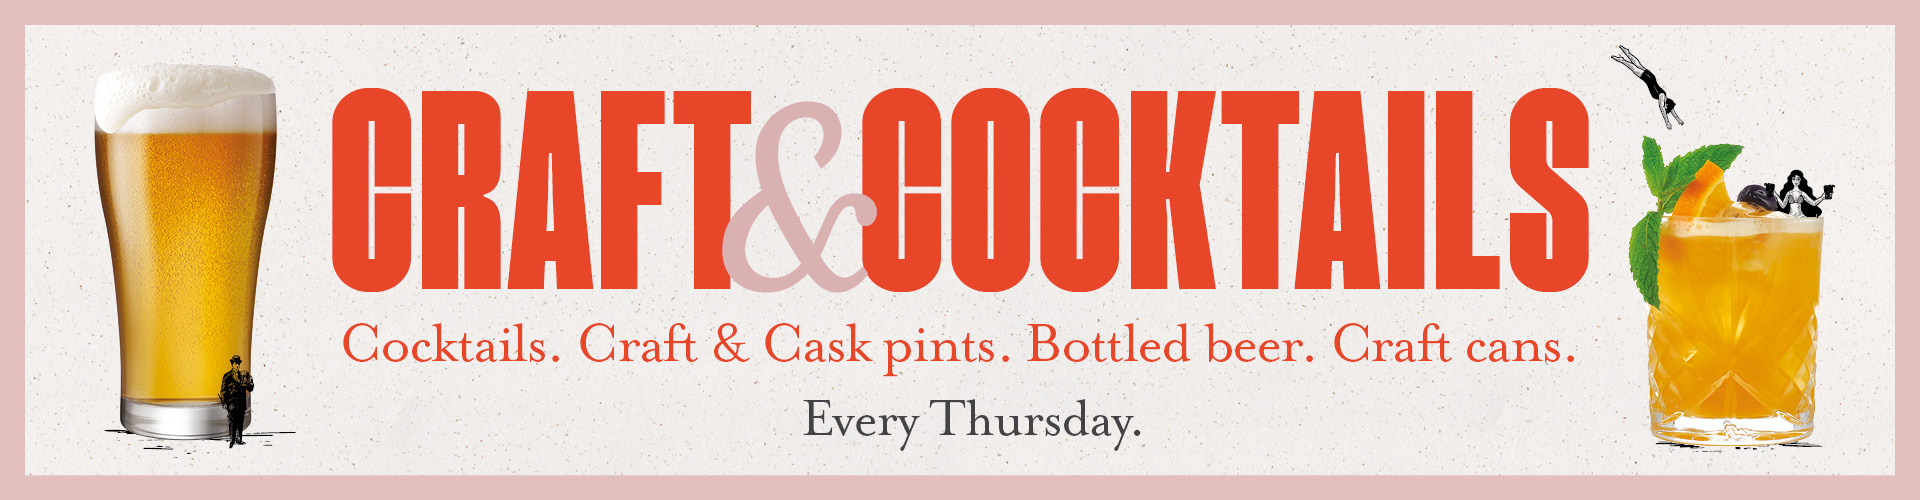 Cocktails, craft & cask pints, bottles beer and craft cans every Thursday 